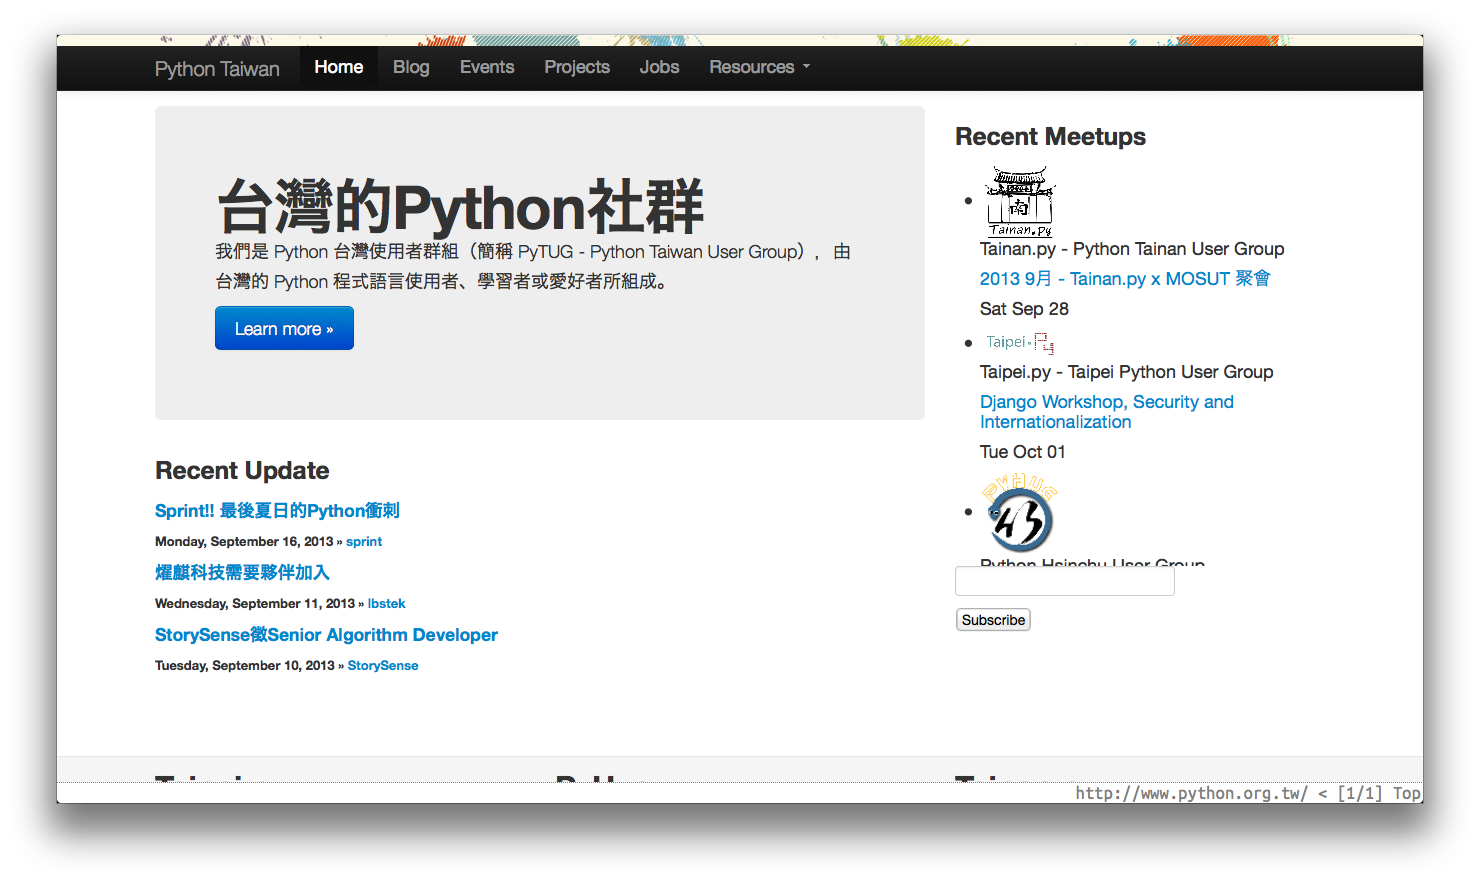 New Python Taiwan official website